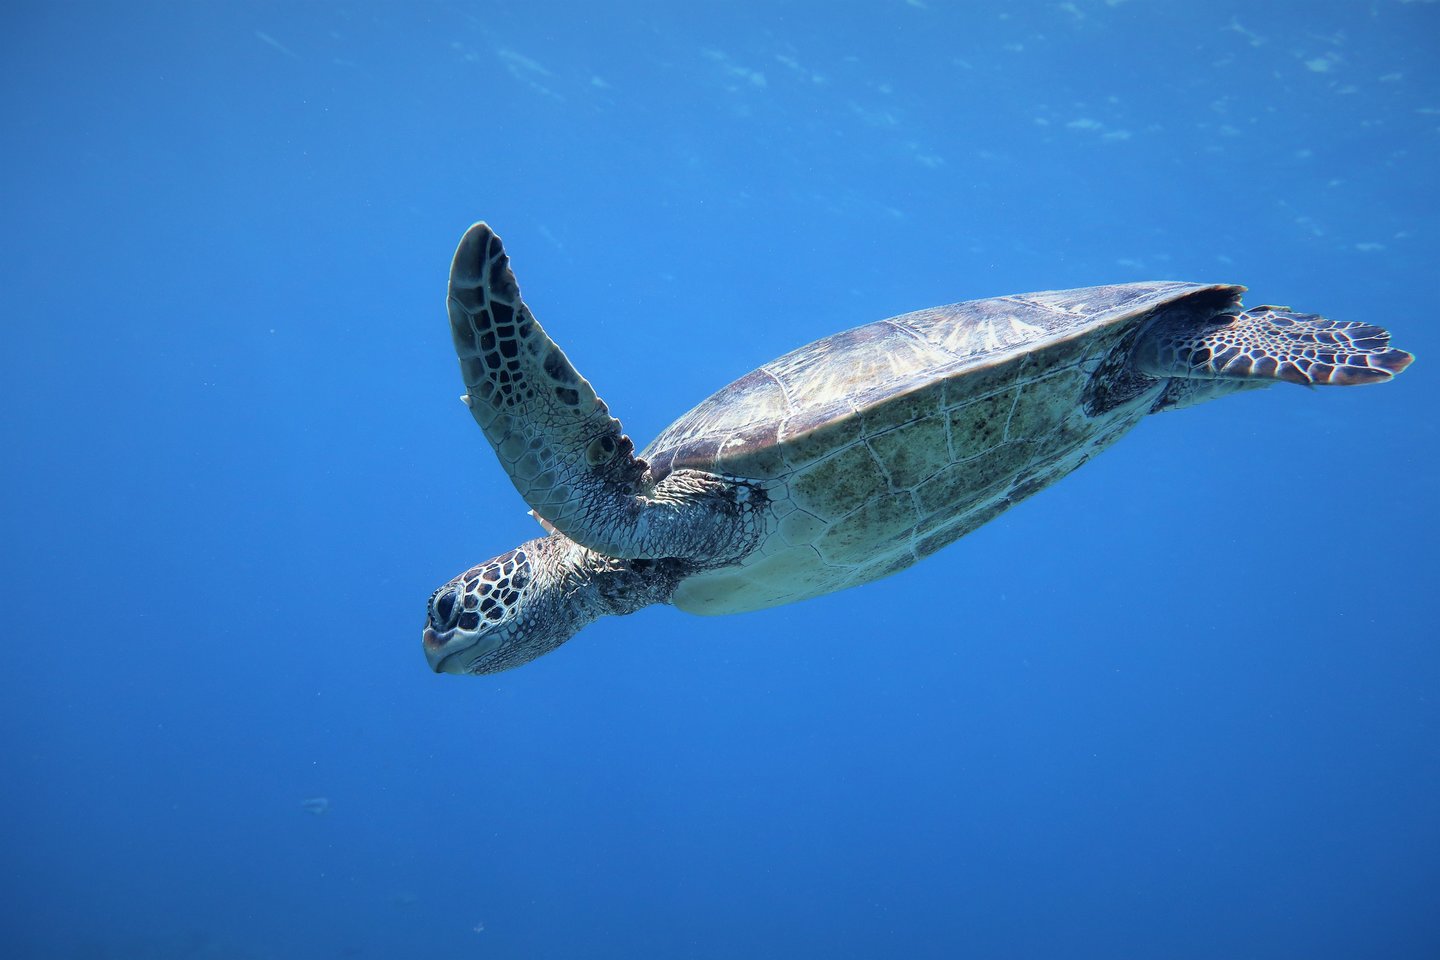 A graceful swimming turtle heading down to the ocean floor looking for food.